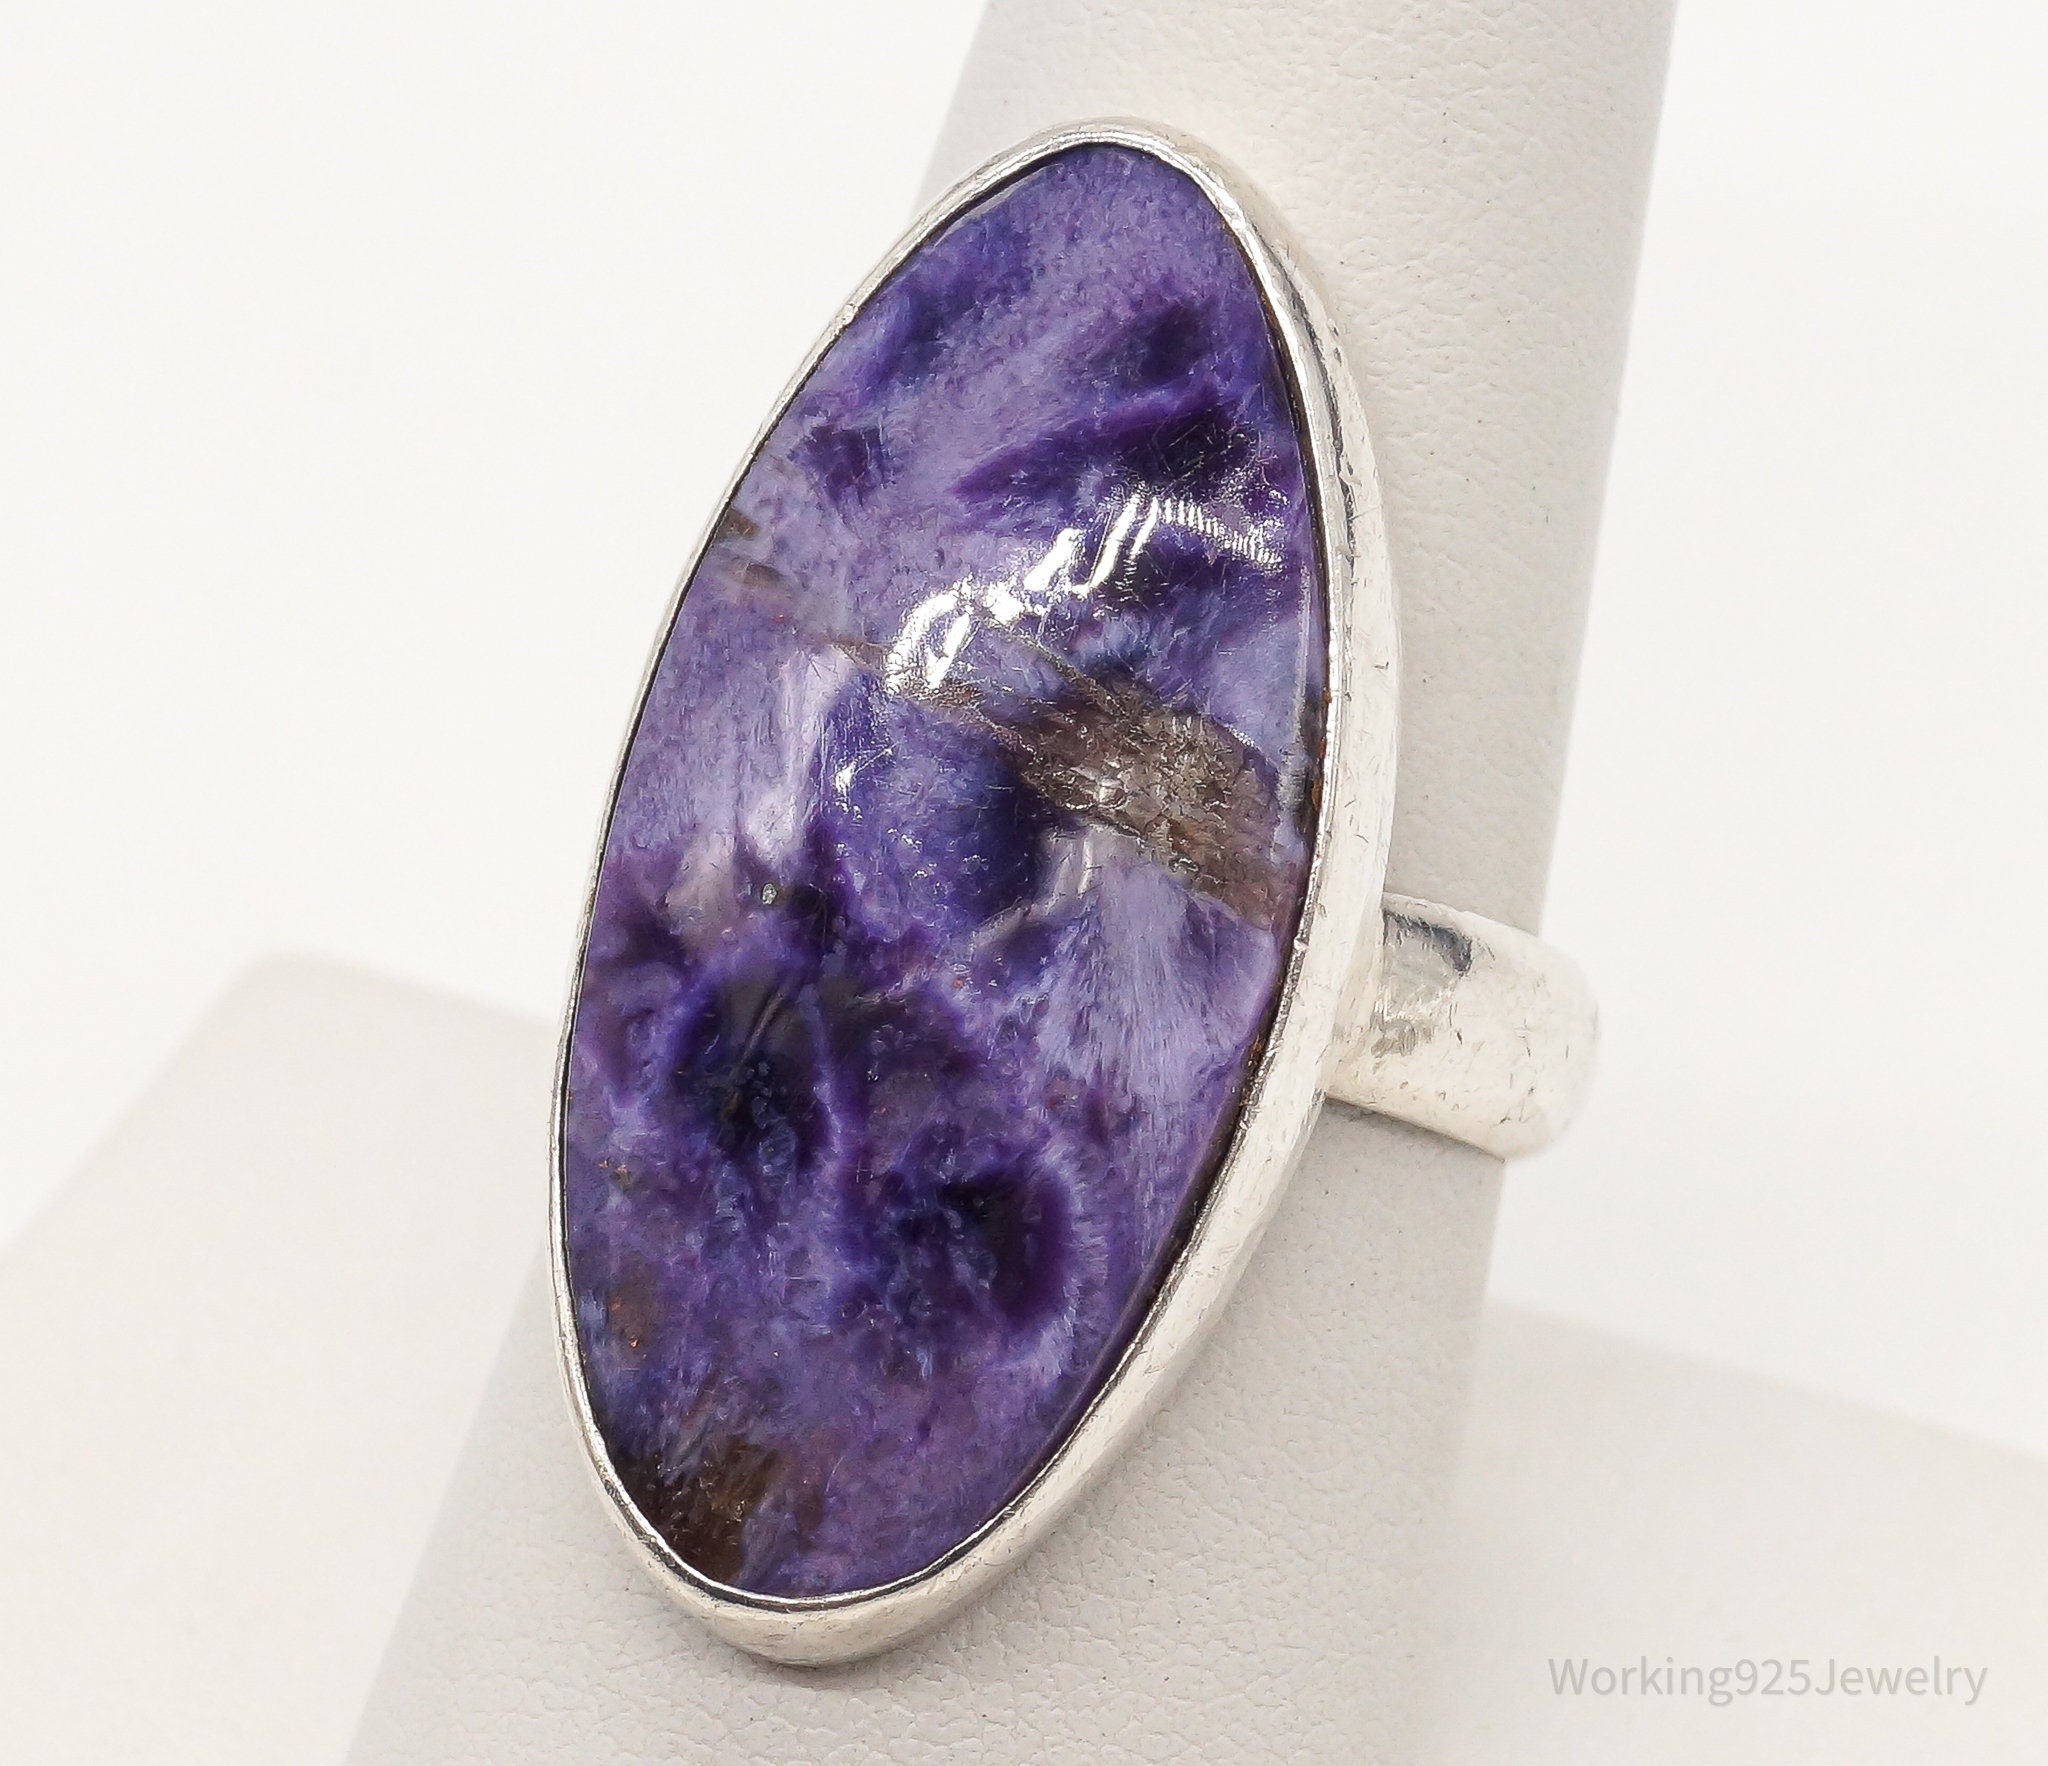 Vintage Large Charoite Sterling Silver Ring - Size 8.25